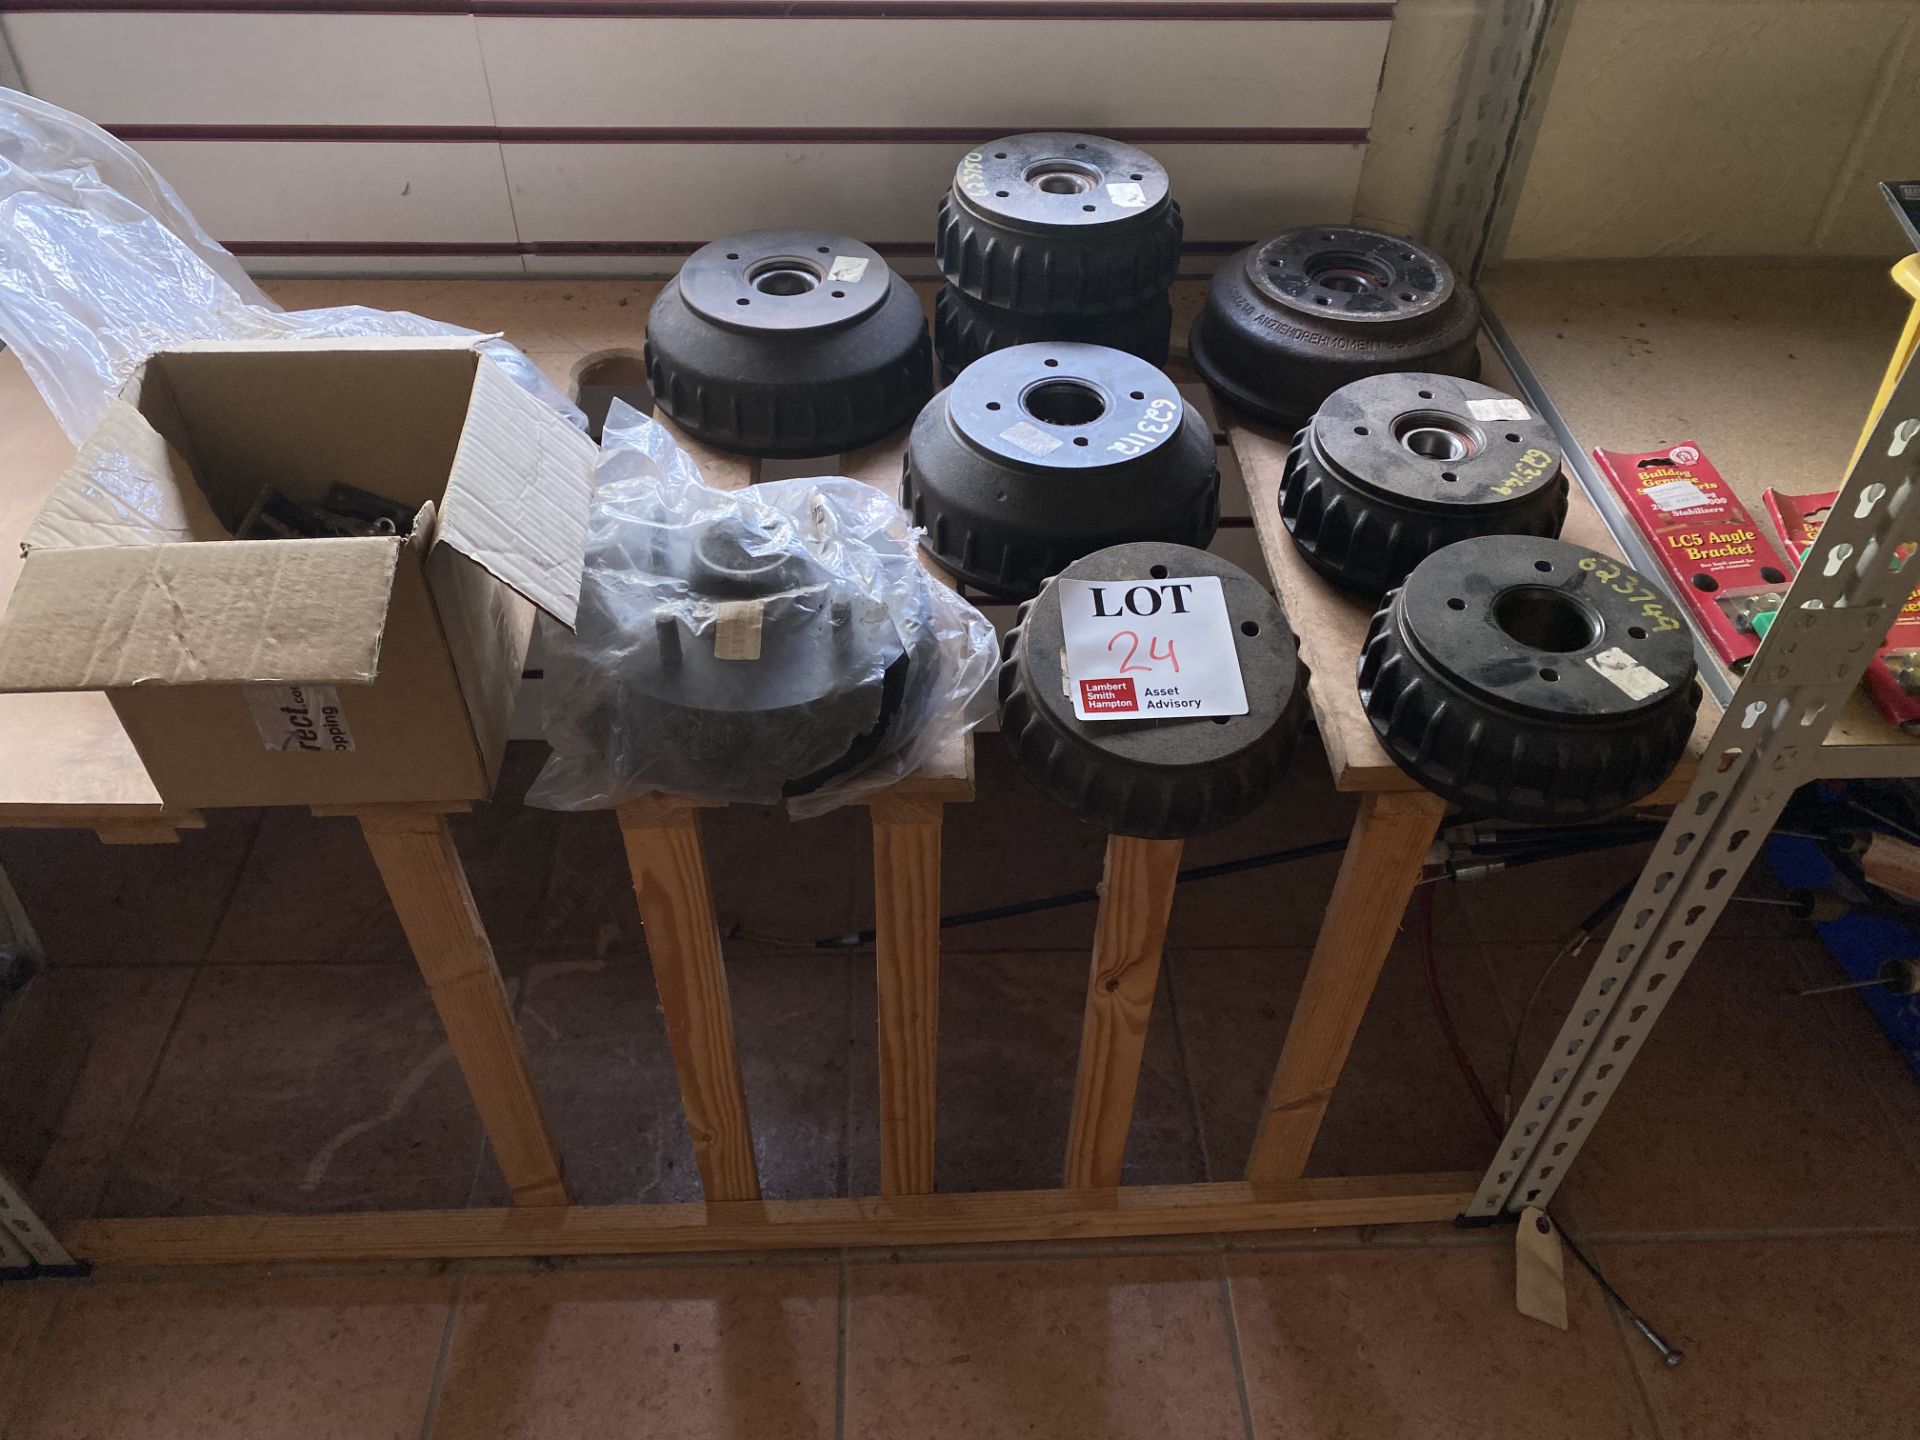 Contents of shelf to include various brake drums